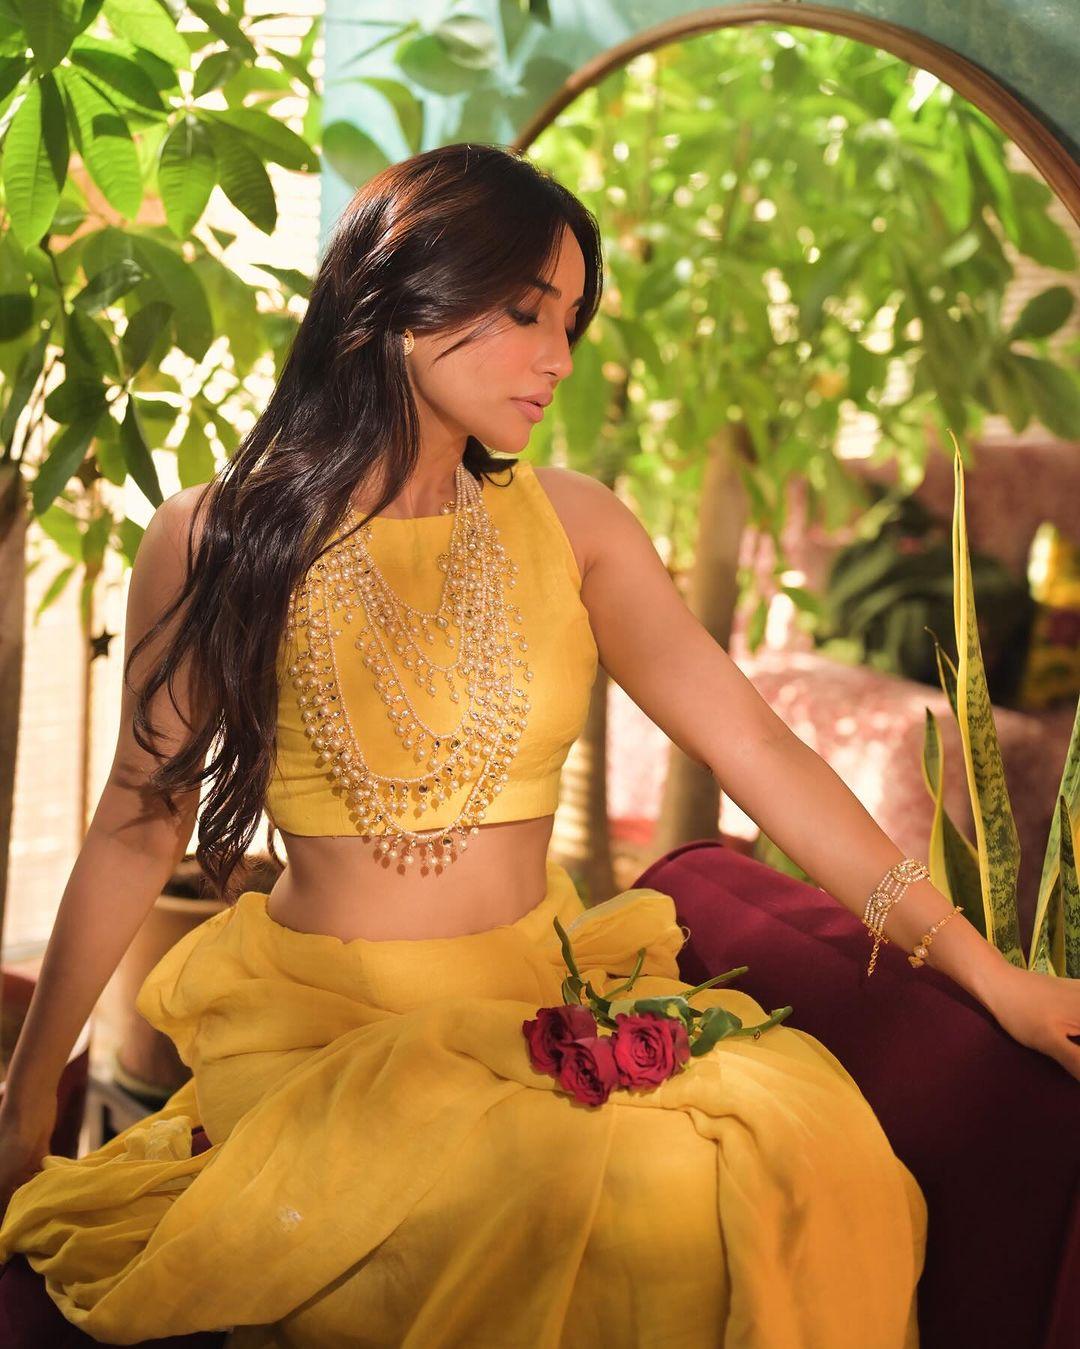 The actress wore a stunning yellow crop top and paired it with a matching long skirt. By adding a pearl necklace, she gave it an indo-western touch